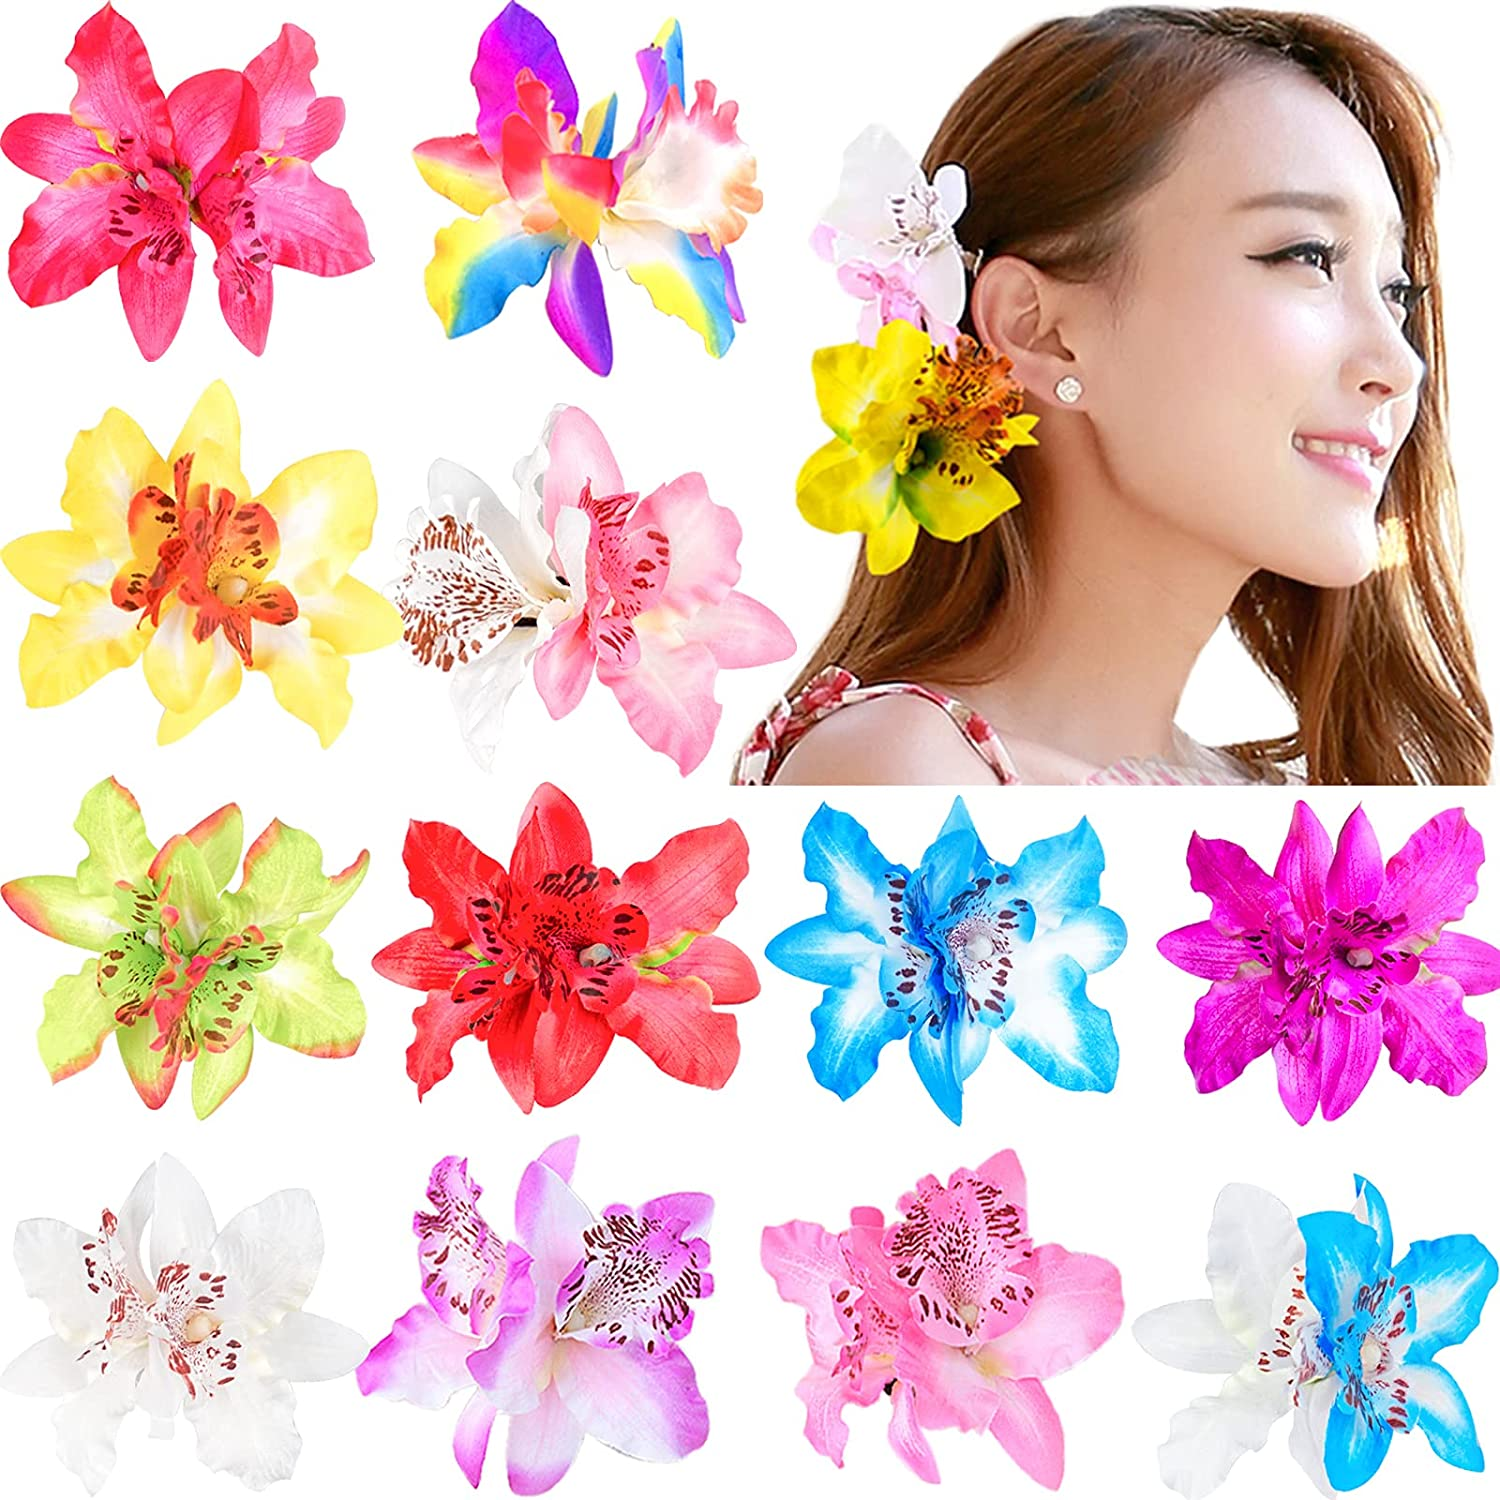 Orchid Flower Hair Pin Hair Clips Accessory for Women (12 Pack)  711181970517 | eBay